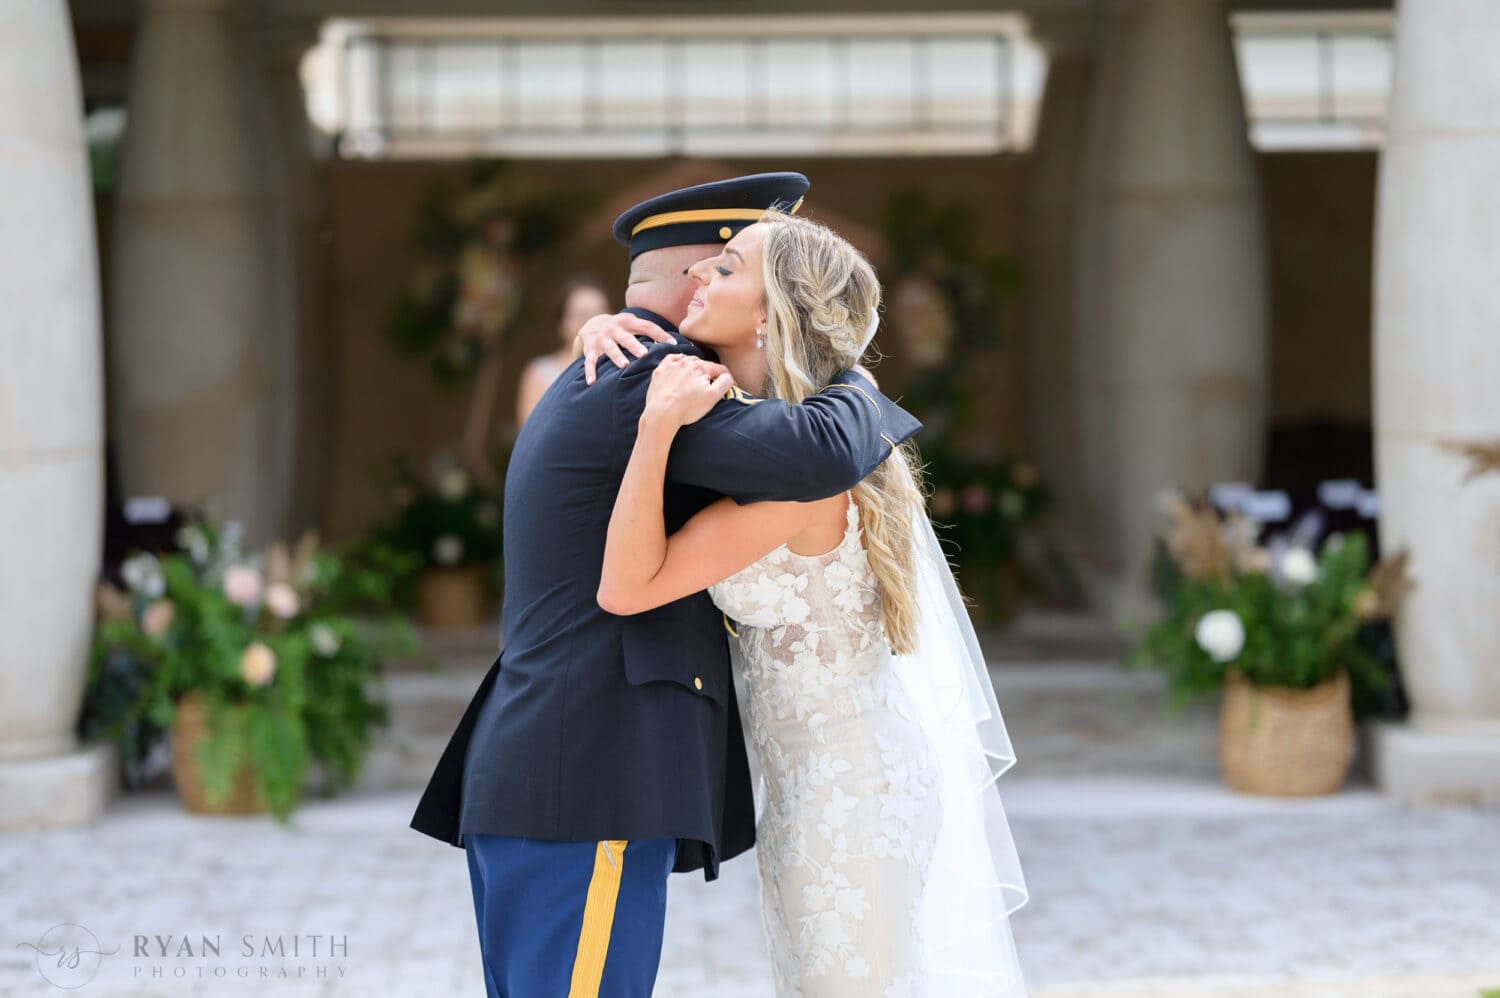 Emotional first look with bride and father in military dress uniform - 21 Main Events